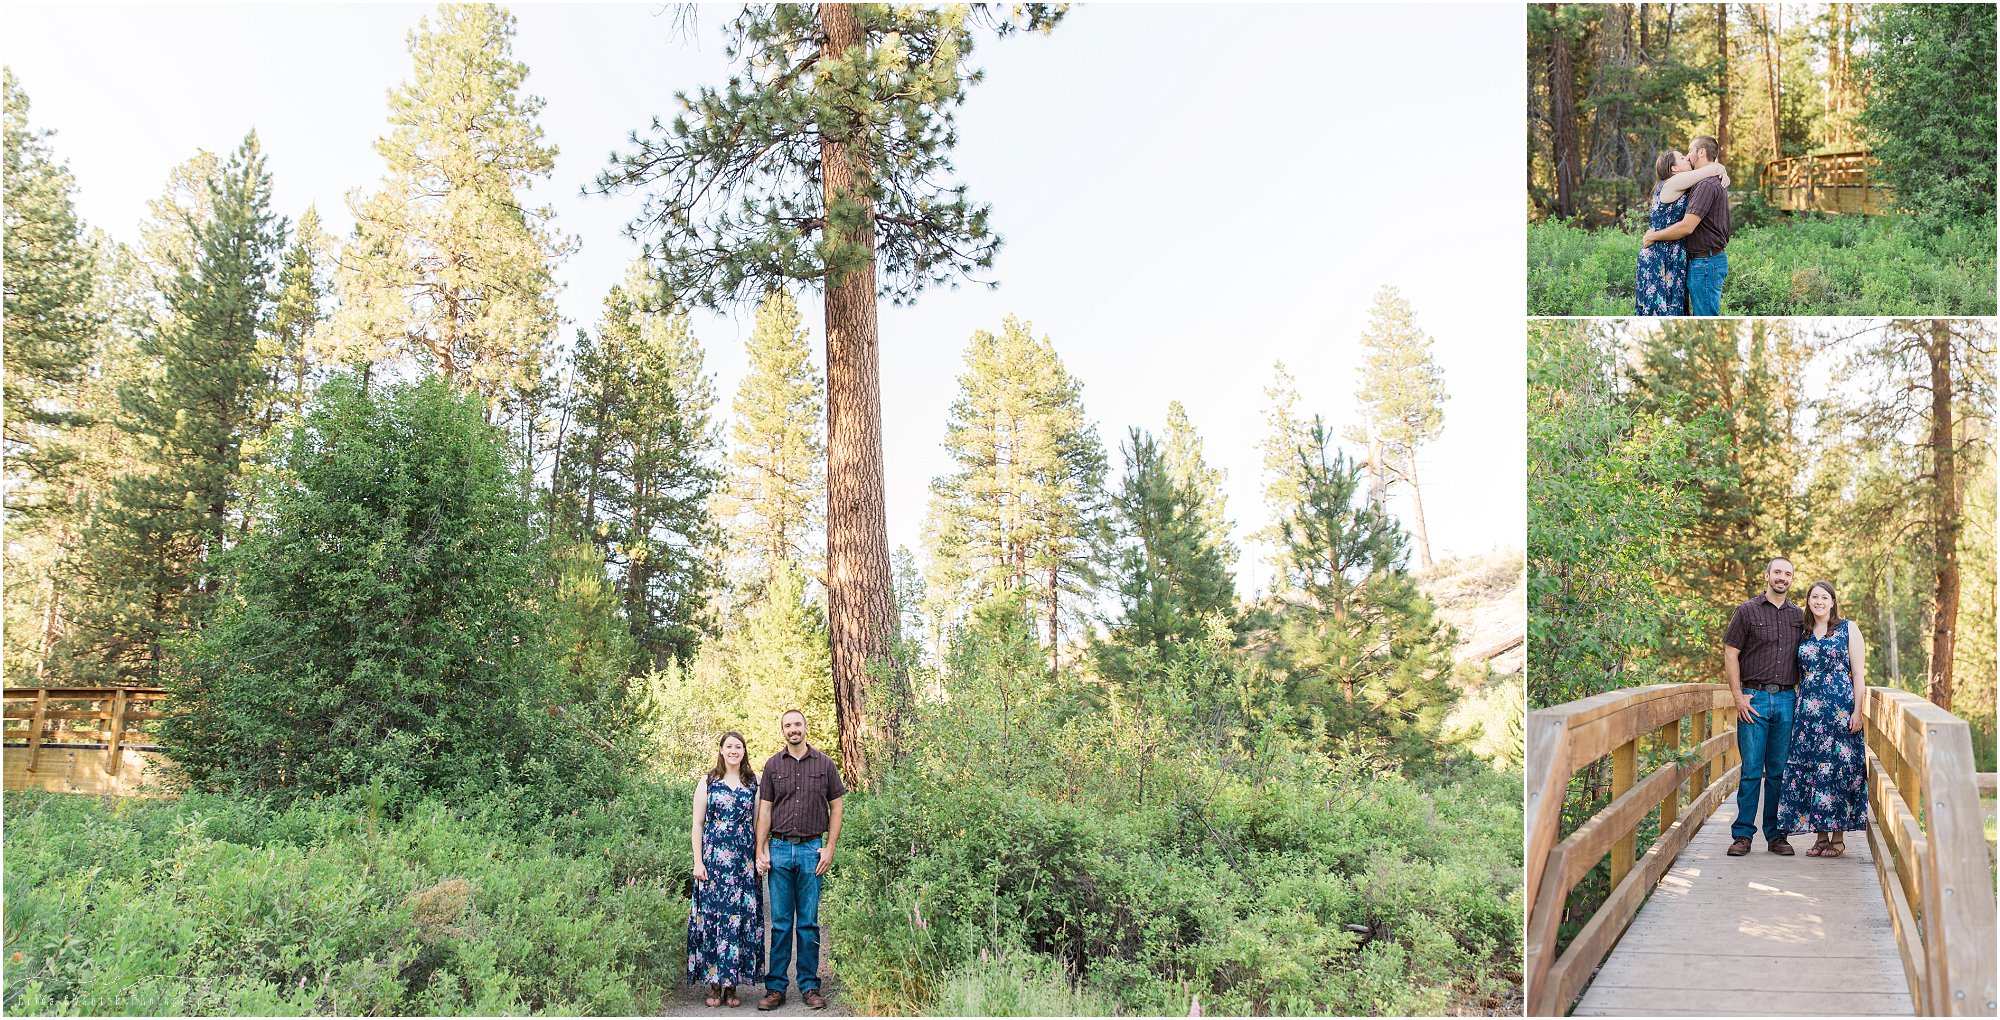 Lovely wooden bridges over Tumalo Creek at Shevlin Park are perfect for engagement photos. | Erica Swantek Photography